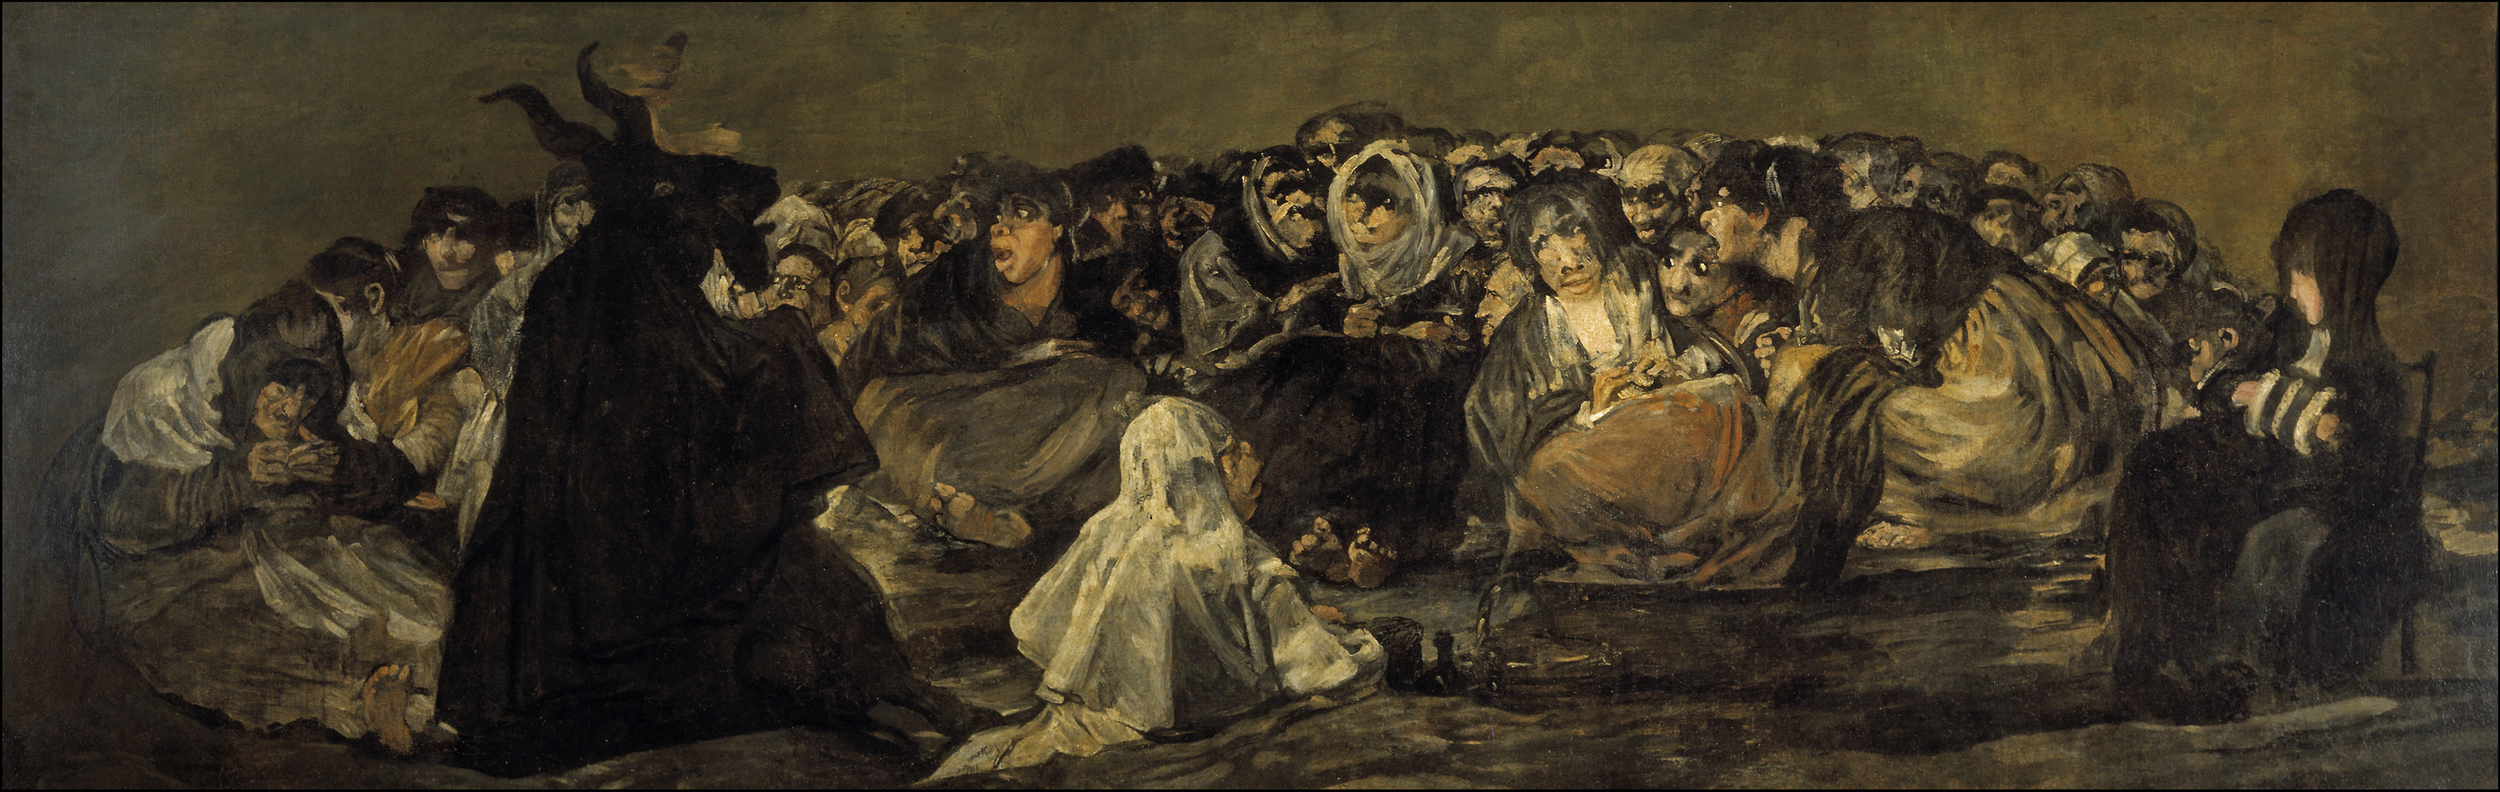 francisco_de_goya_y_lucientes_-_witches_sabbath_the_great_he-goat.jpg